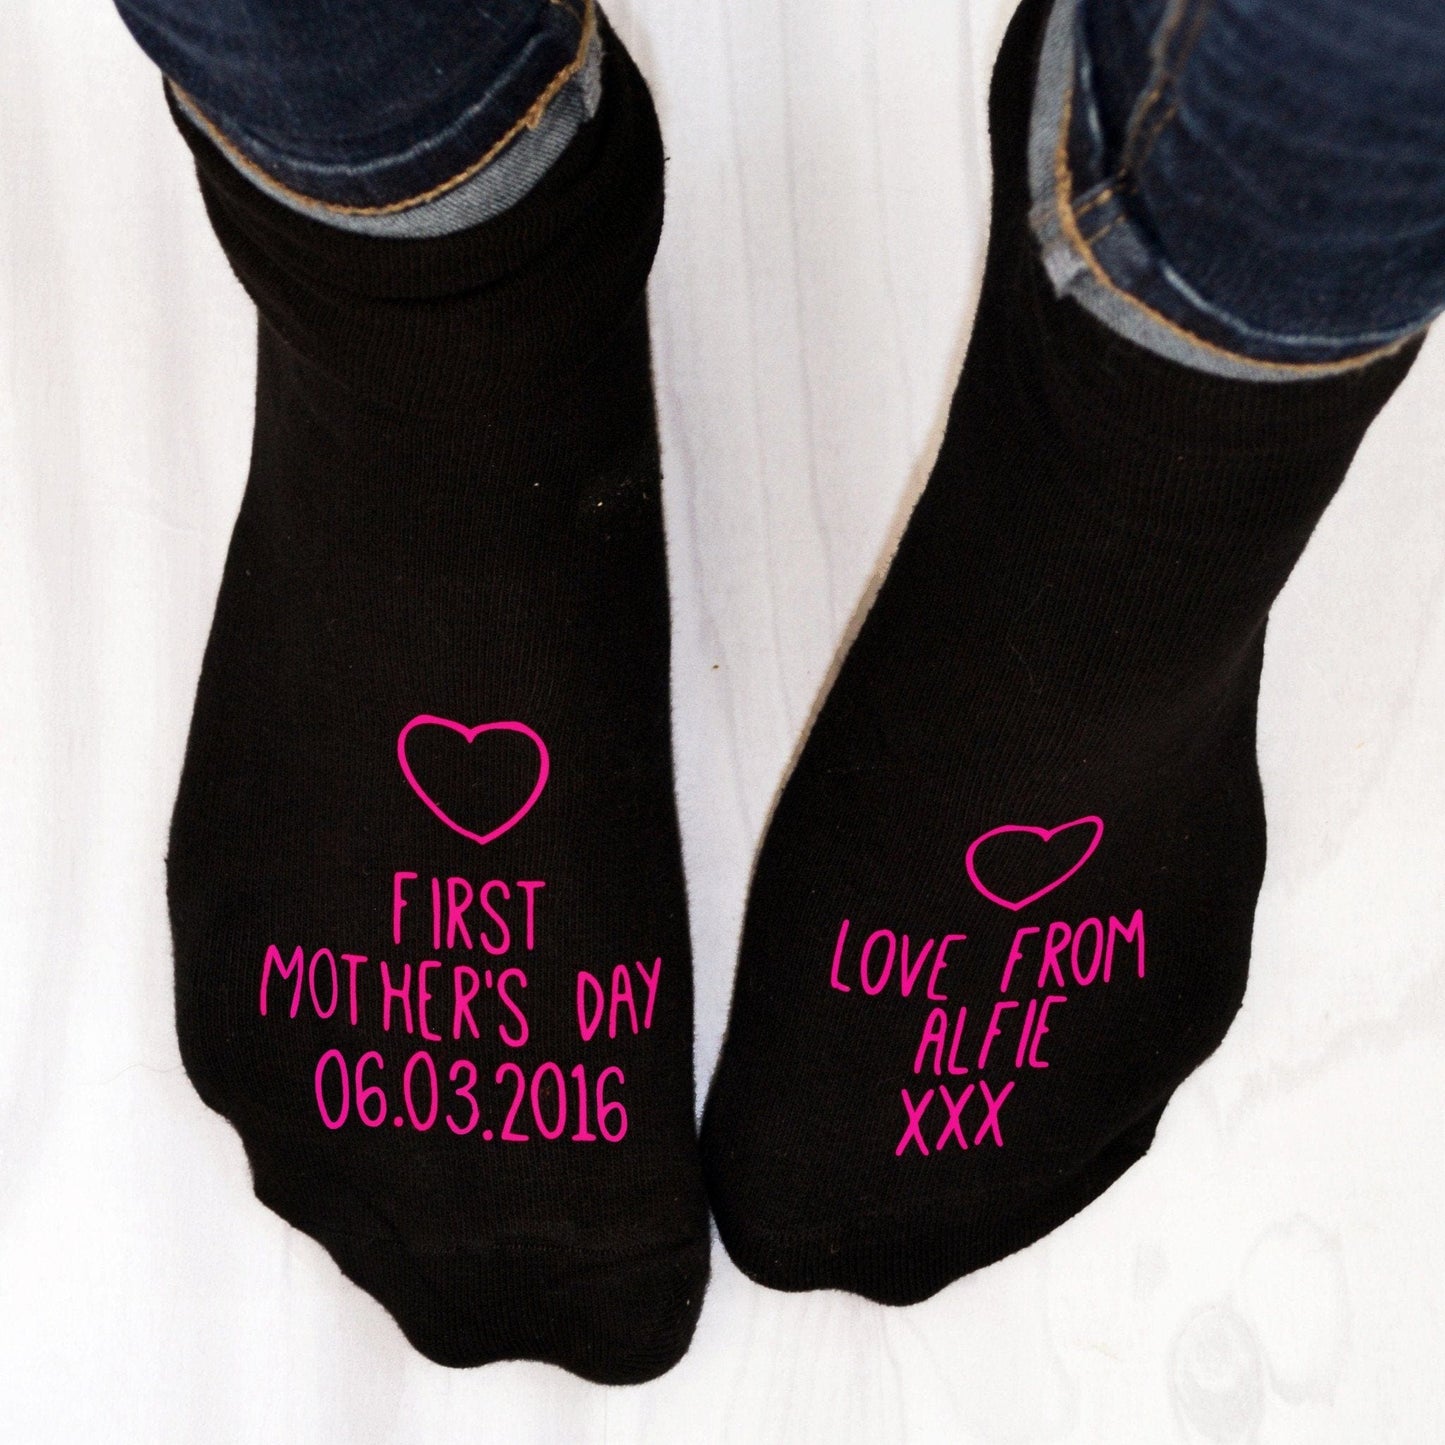 Personalised Socks - First Mother's Day, socks, - ALPHS 